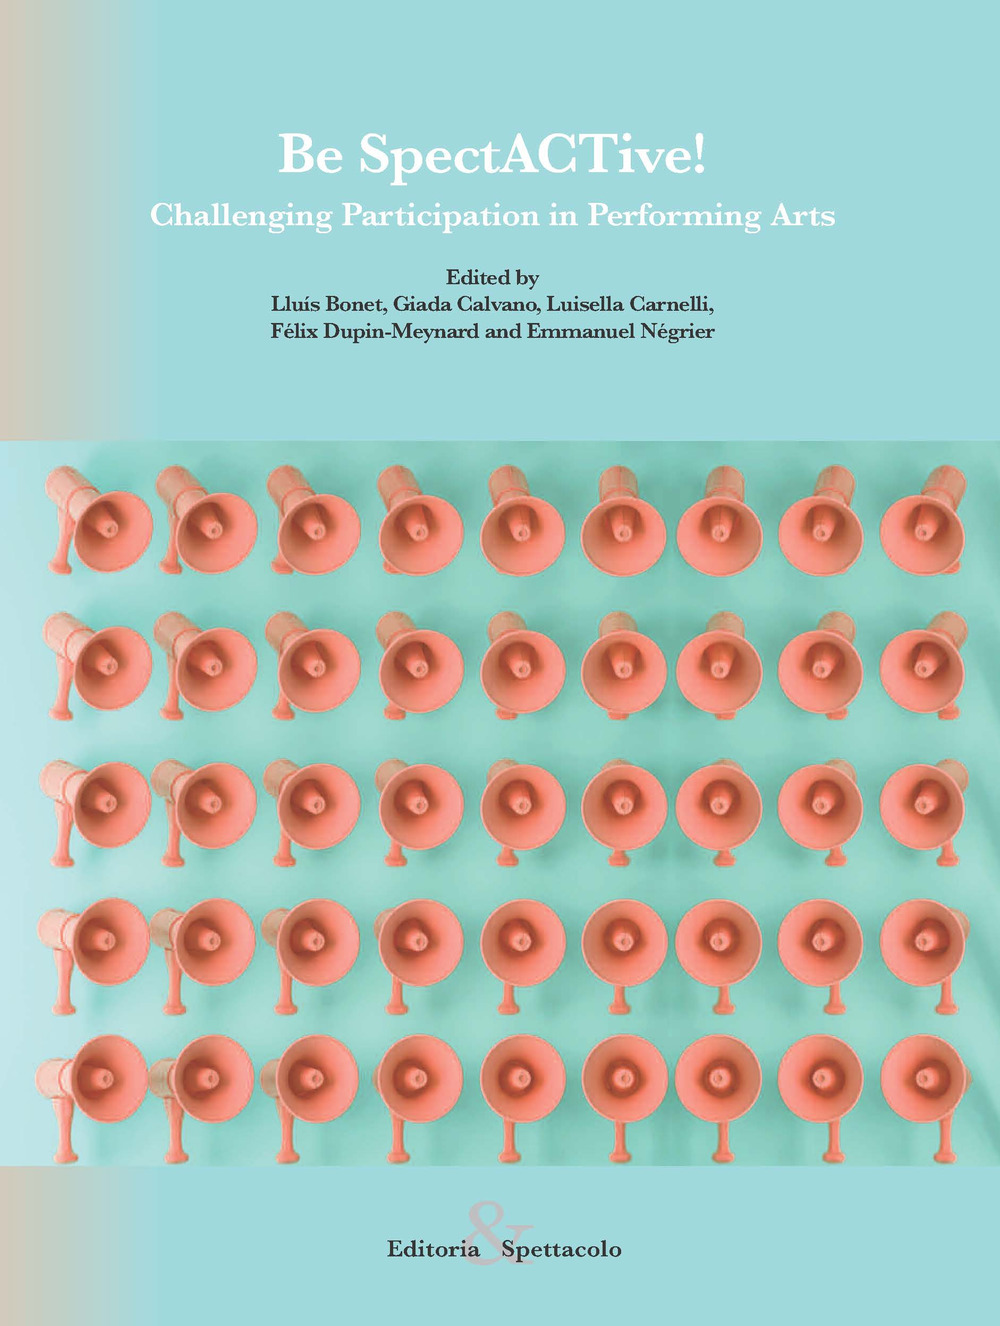 Be SpectACTive! Challenging Participation in Performing Arts